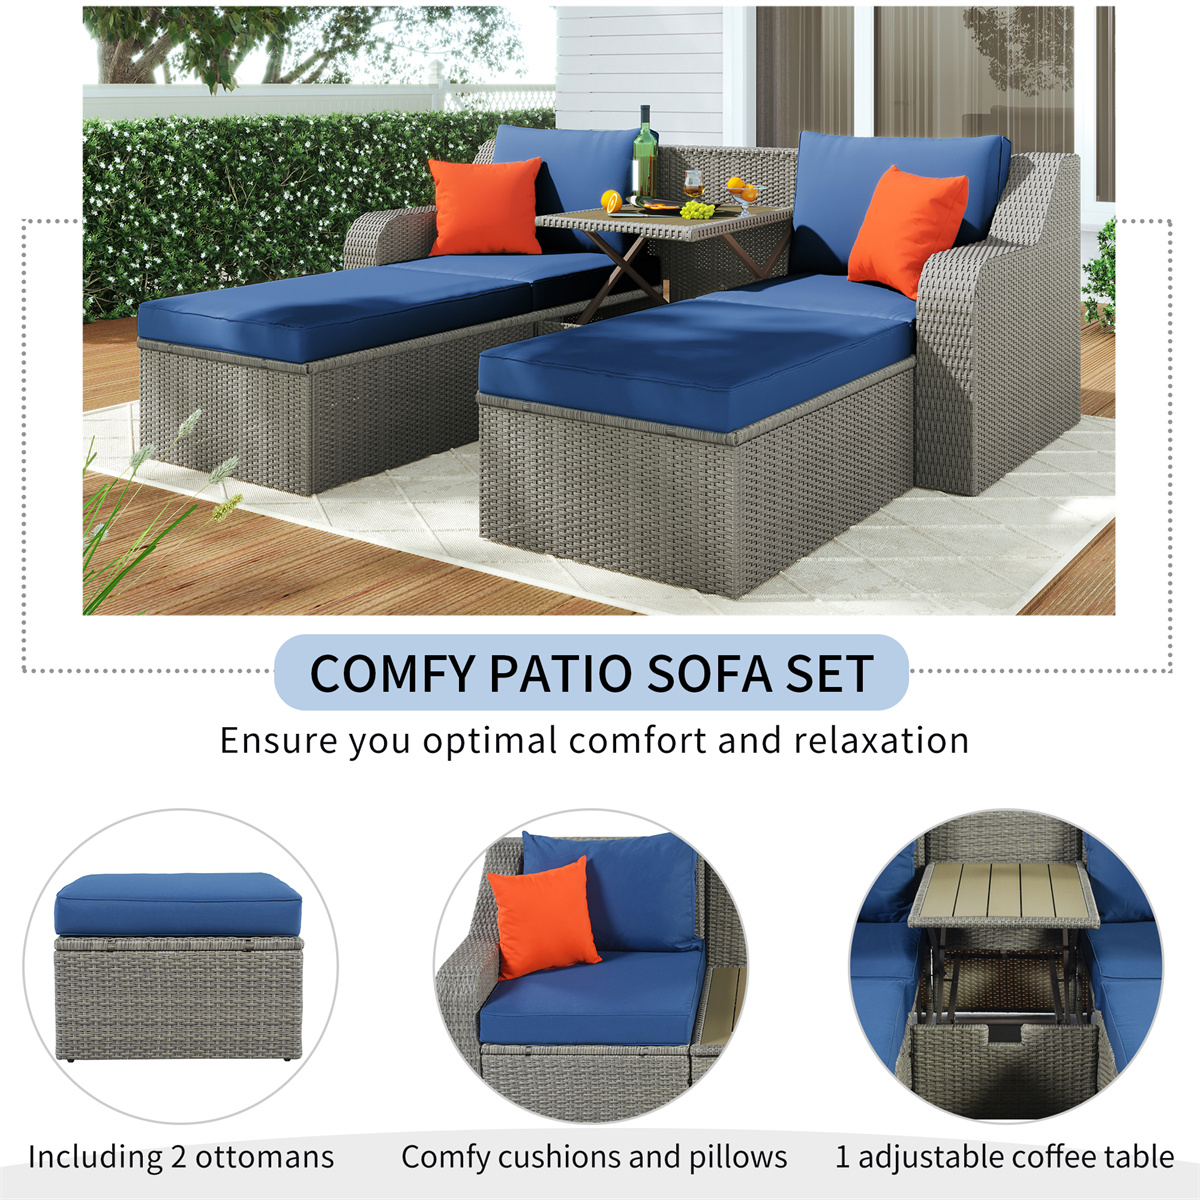 ARCTICSCORPION Patio Wicker Furniture Set,3-Piece Sectional Wicker Sofa with Cushions,Pillows,Ottomans and Lift Top Coffee Table,Outdoor Lounge Chair Conversation Set for Garden Backyard Deck,Blue - image 3 of 7